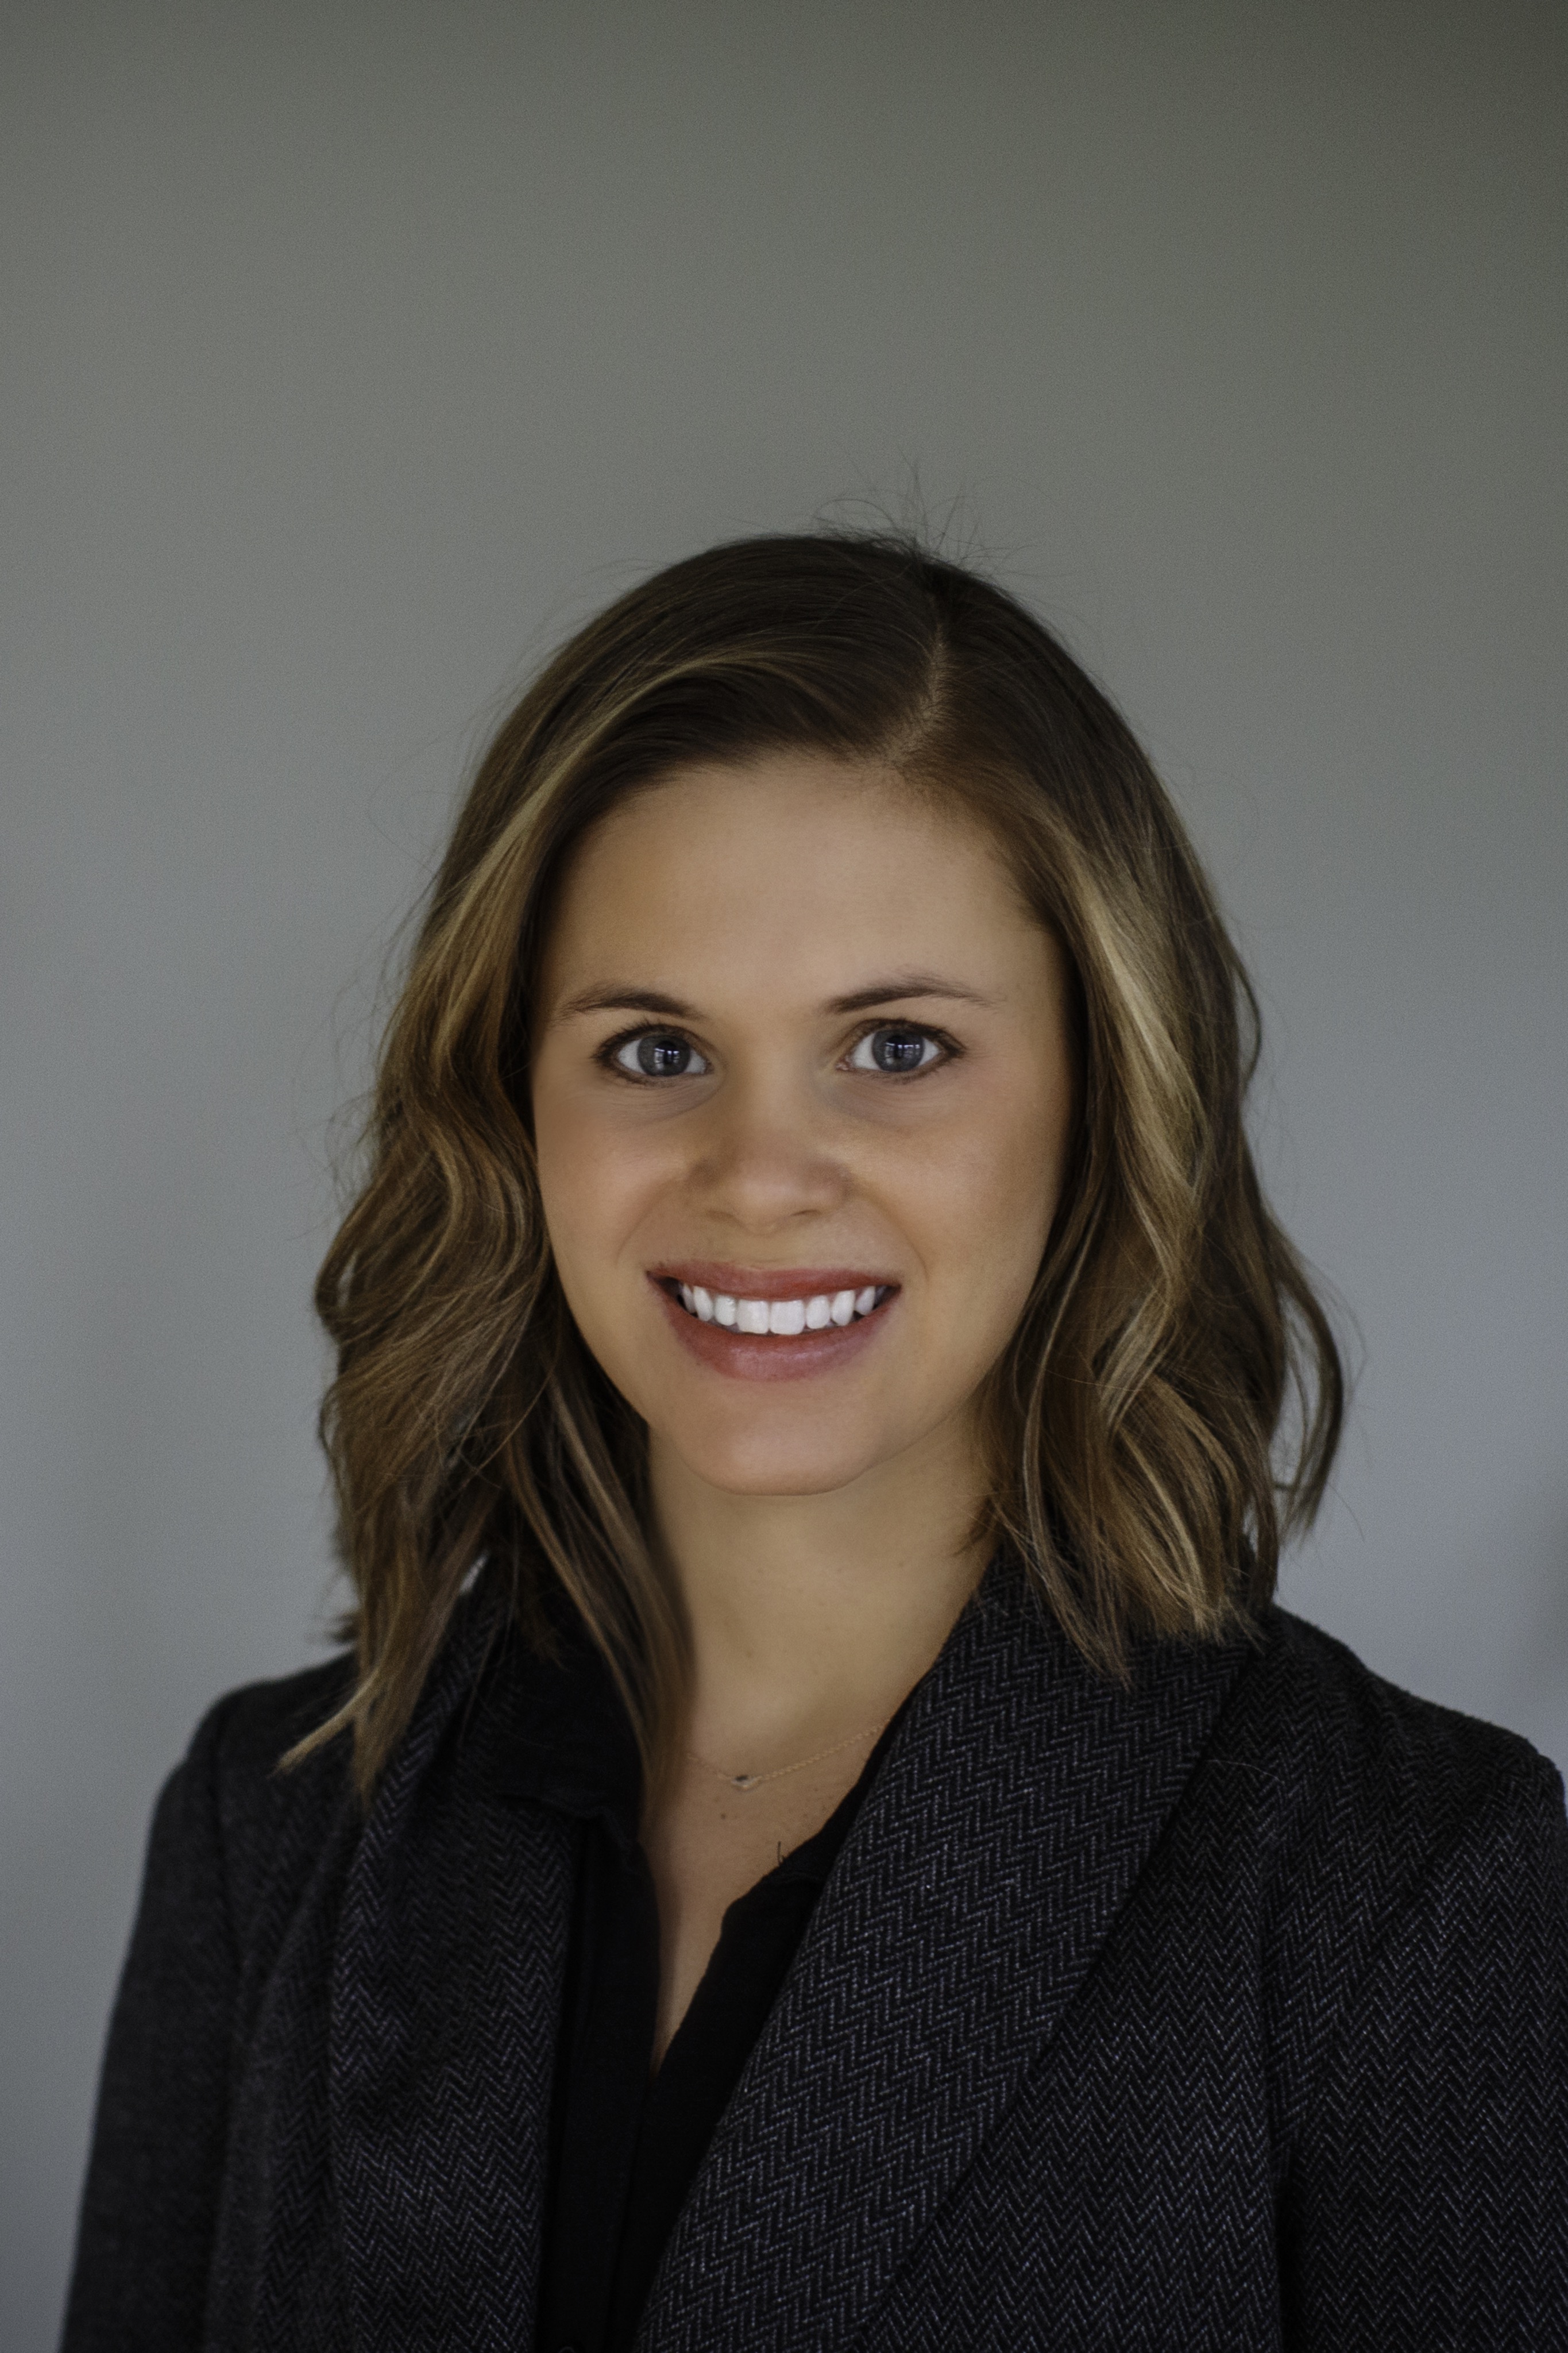 Tech Lighting has hired Holly Graves as Western Region Sales Manager